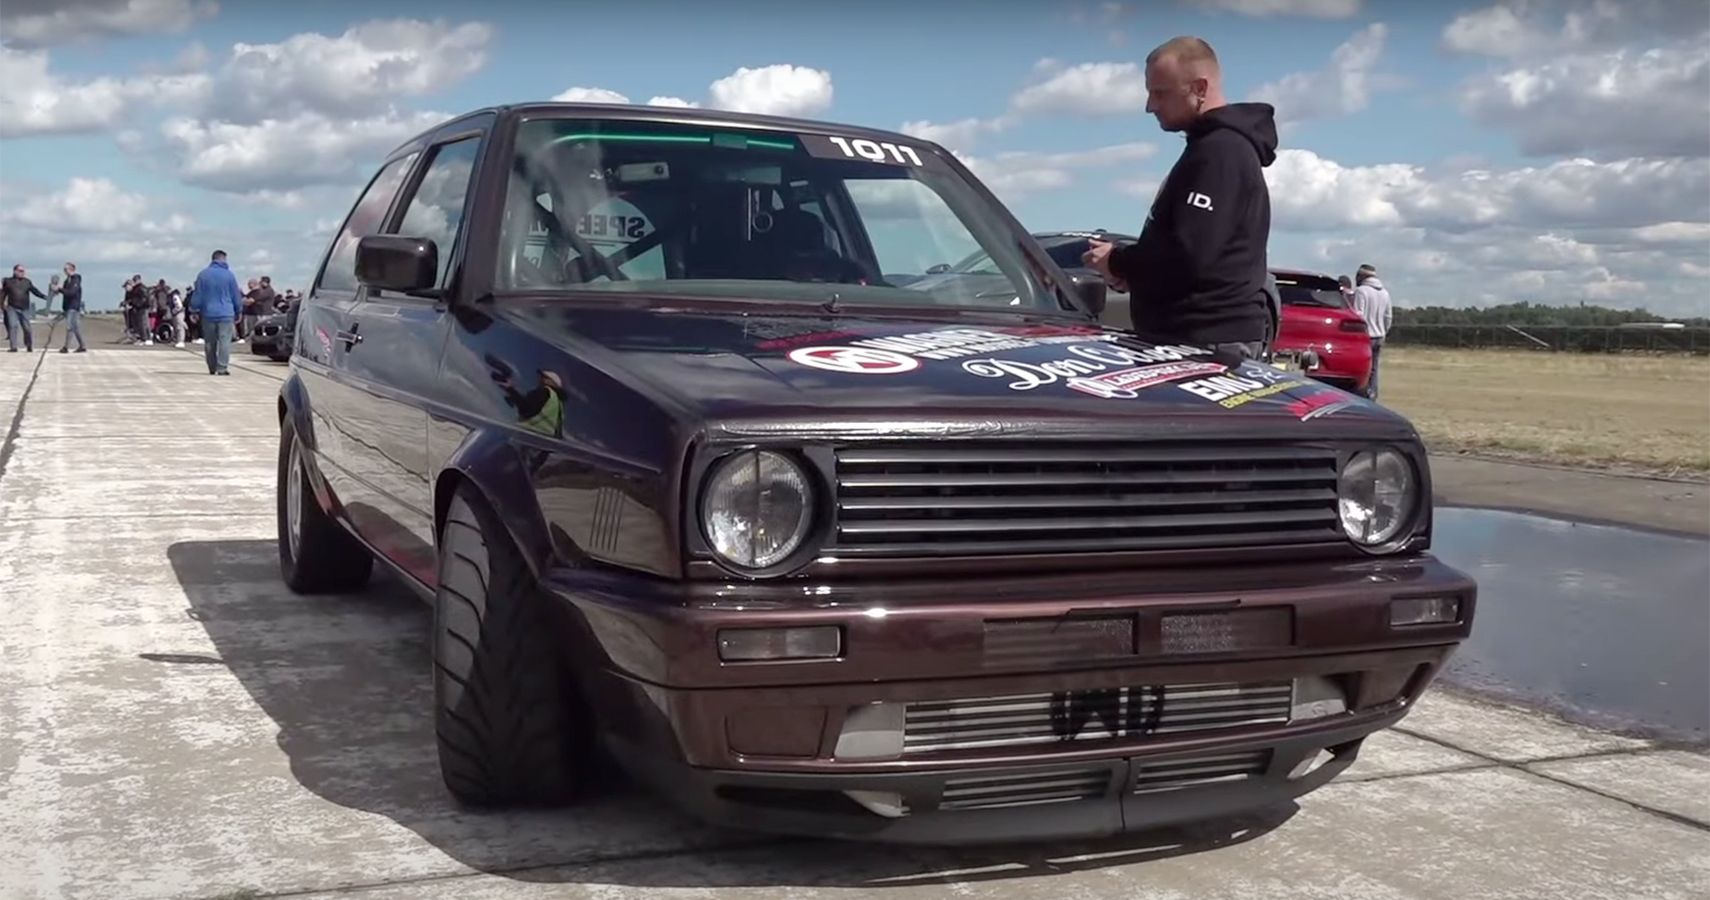 1,600 HP Volkswagen Golf Has Two VR6 Engines, Hits 190 MPH in the 1/2 Mile  - autoevolution